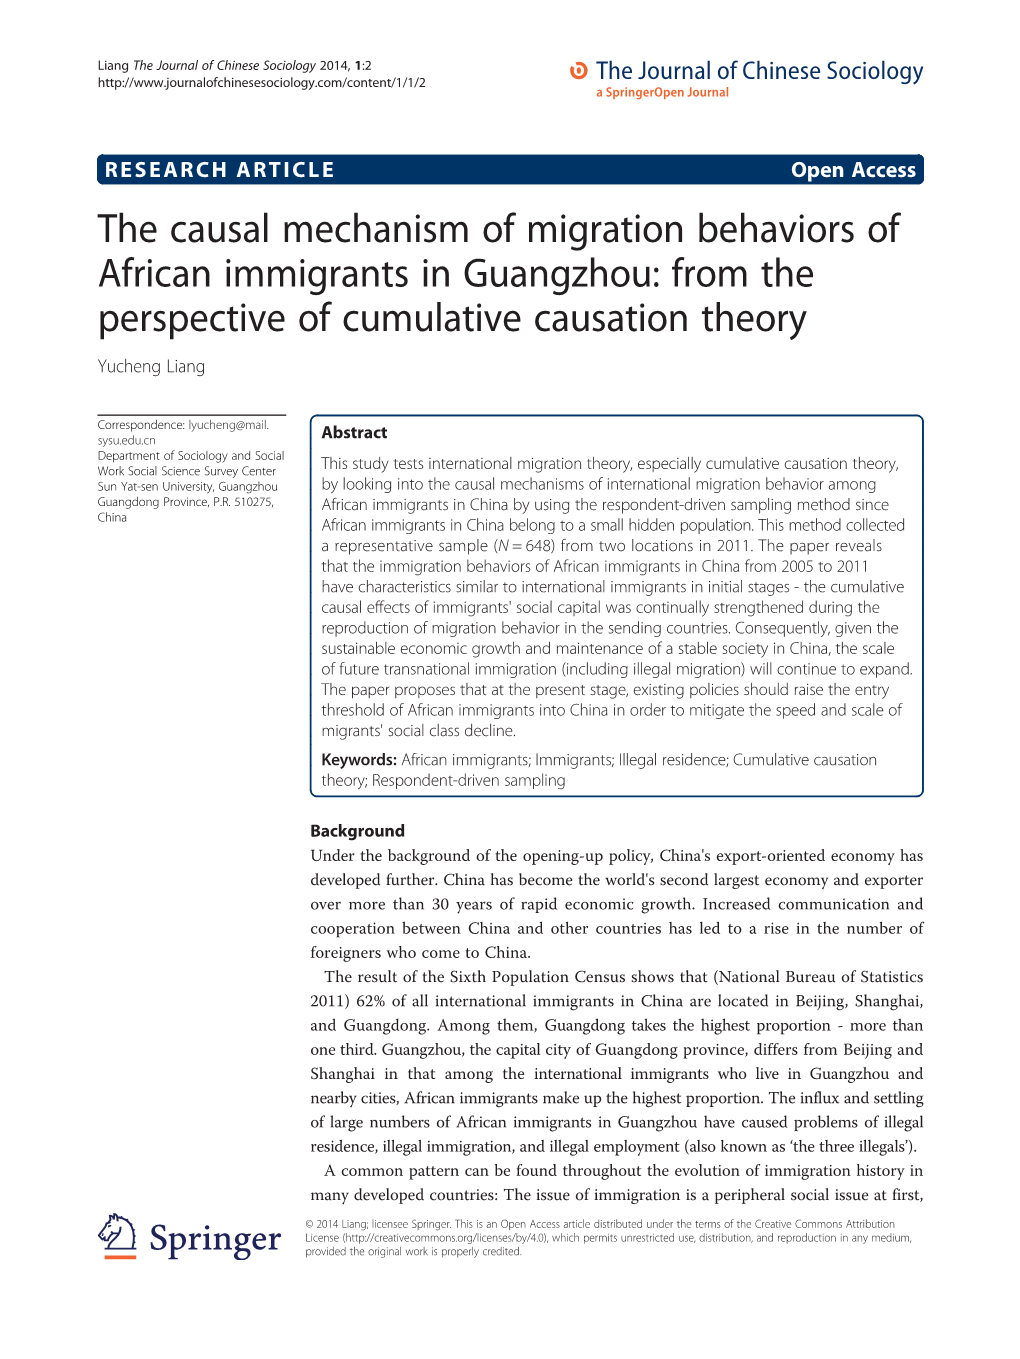 The Causal Mechanism of Migration Behaviors of African Immigrants in Guangzhou: from the Perspective of Cumulative Causation Theory Yucheng Liang